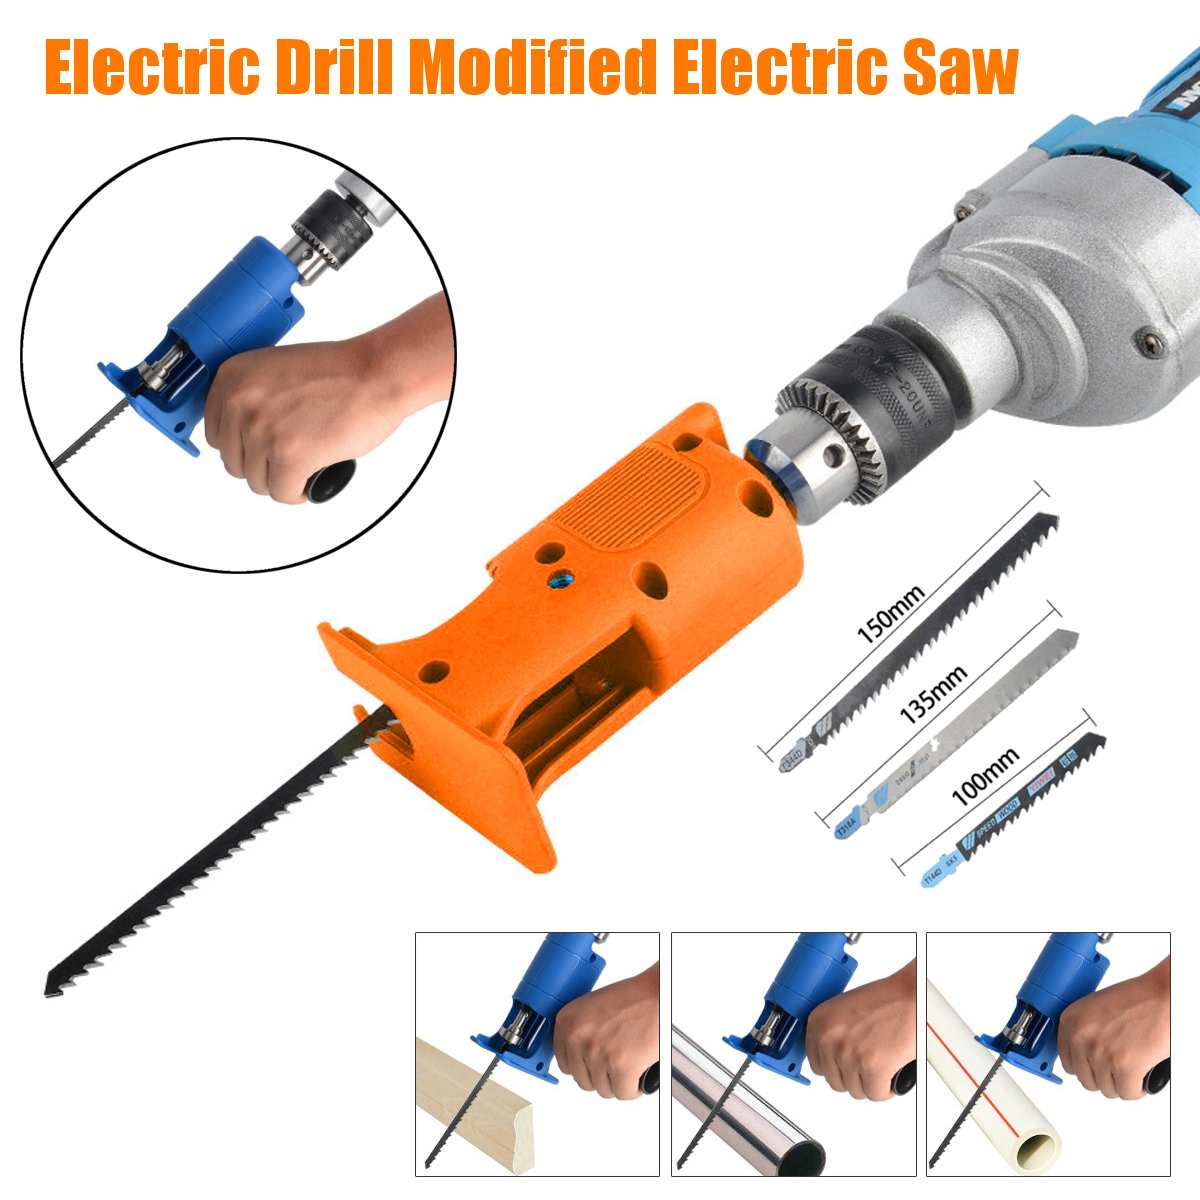 13€ with Coupon for Drillpro Reciprocating Saw Attachment Adapter Change Electric Drill - EU 🇪🇺 - BANGGOOD